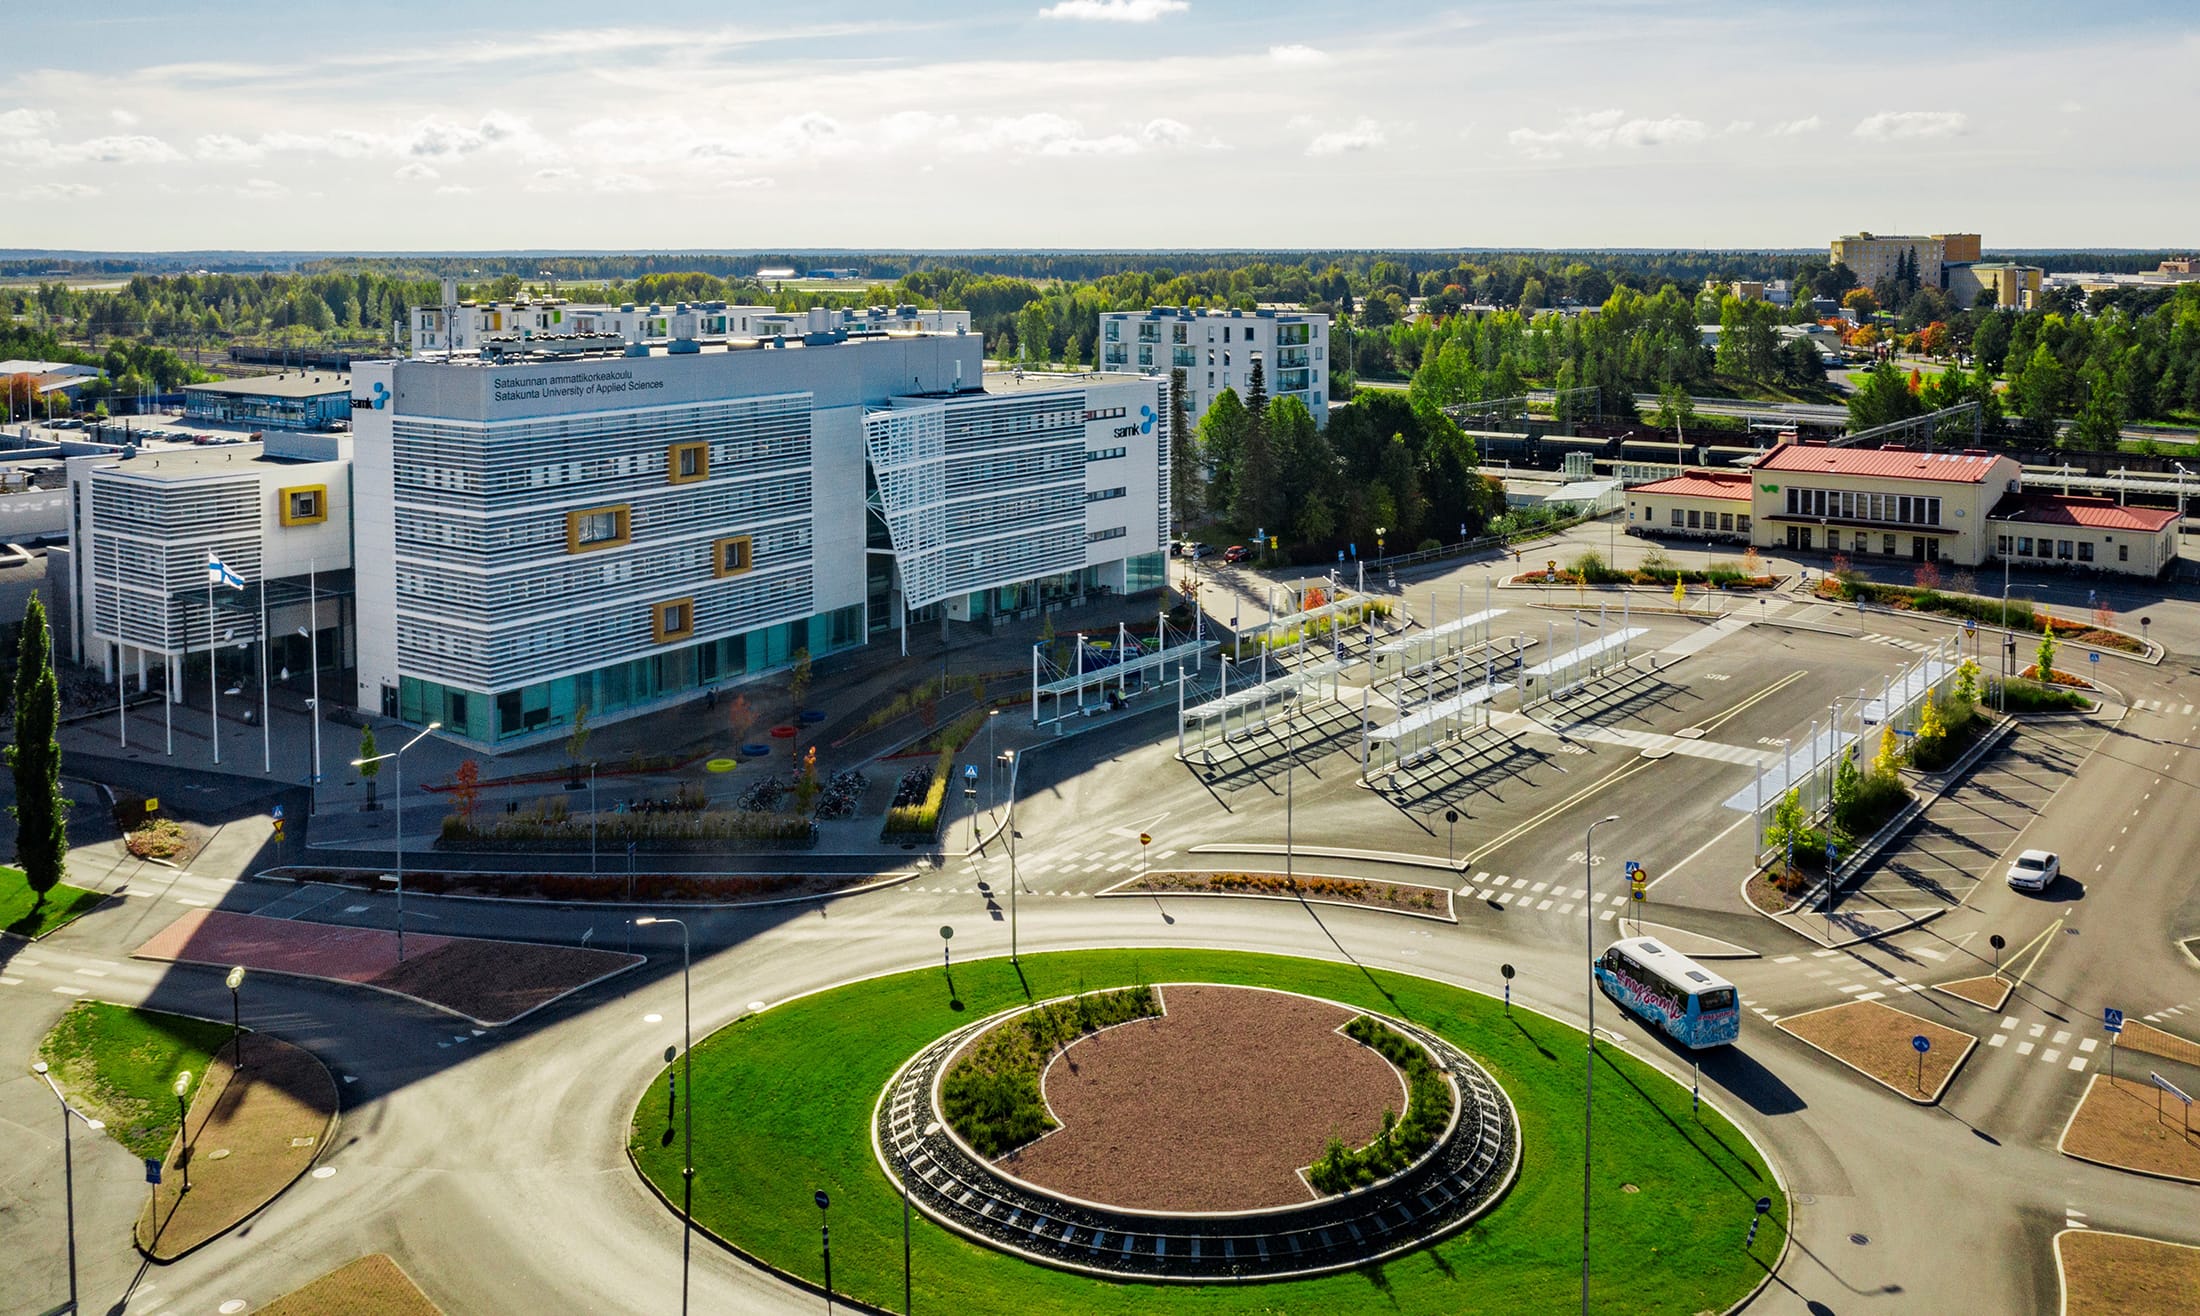 A summer aerial view of the Pori campus and its surroundings.